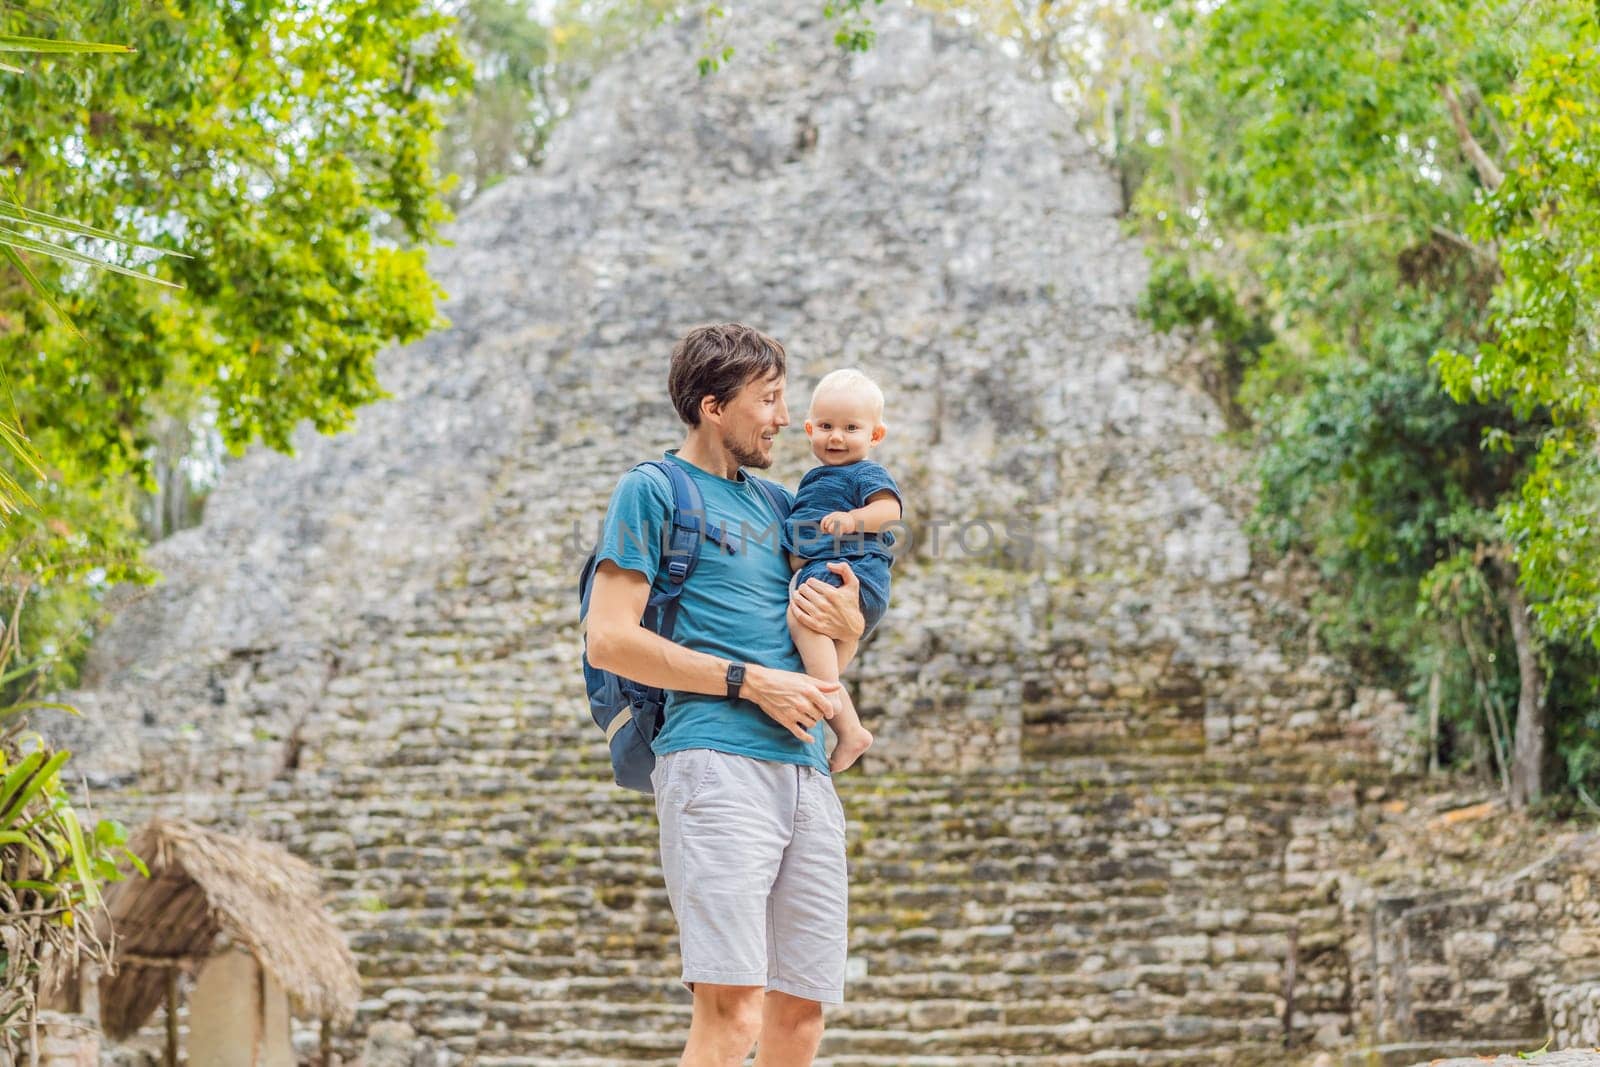 Dad and son tourists at Coba, Mexico. Ancient mayan city in Mexico. Coba is an archaeological area and a famous landmark of Yucatan Peninsula. Cloudy sky over a pyramid in Mexico by galitskaya